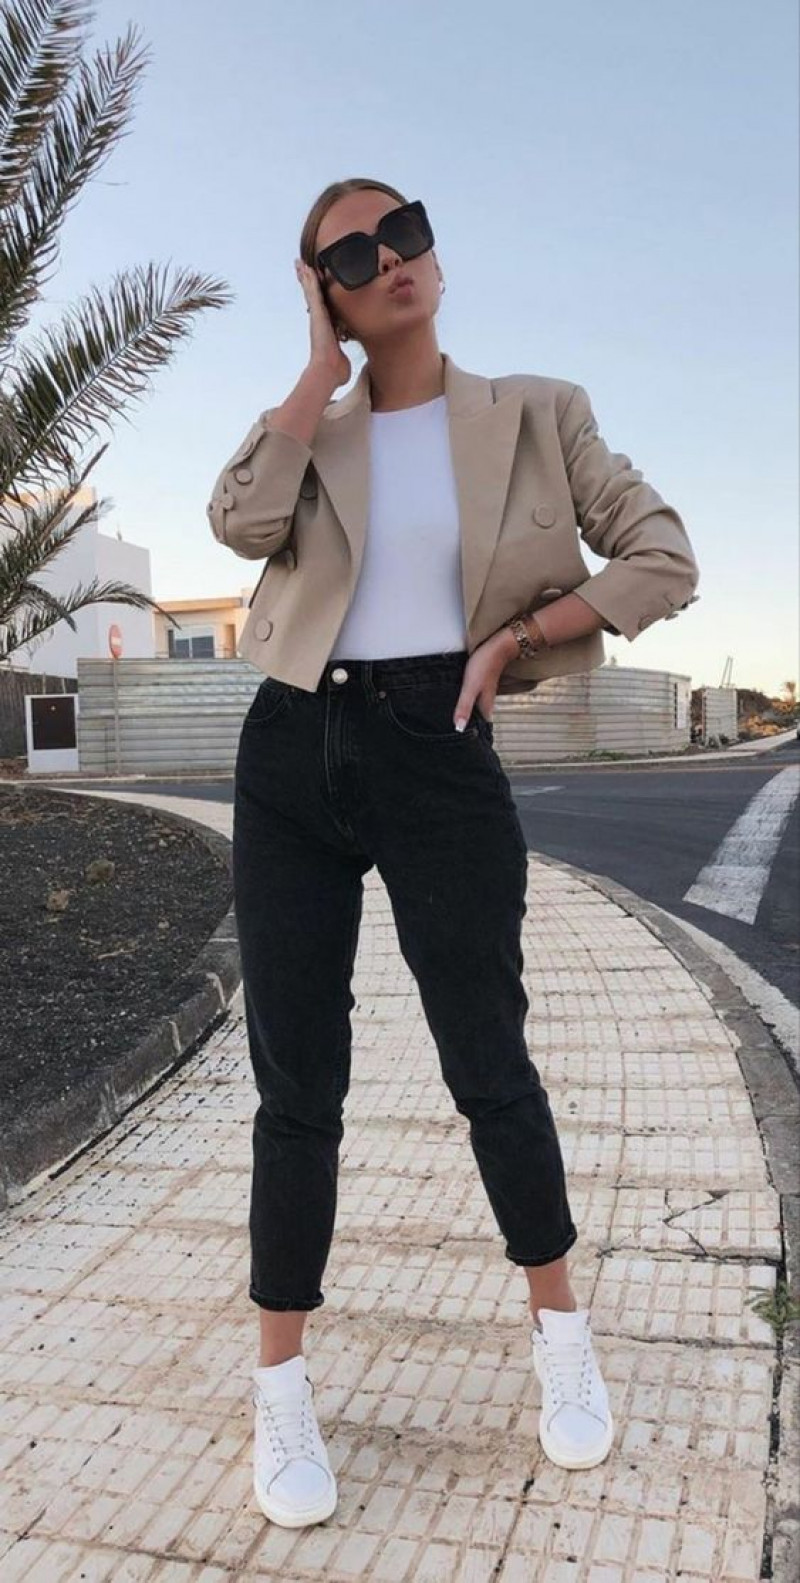 jeans, womens fashion, black jeans, beige suit jackets and tuxedo, white sneaker